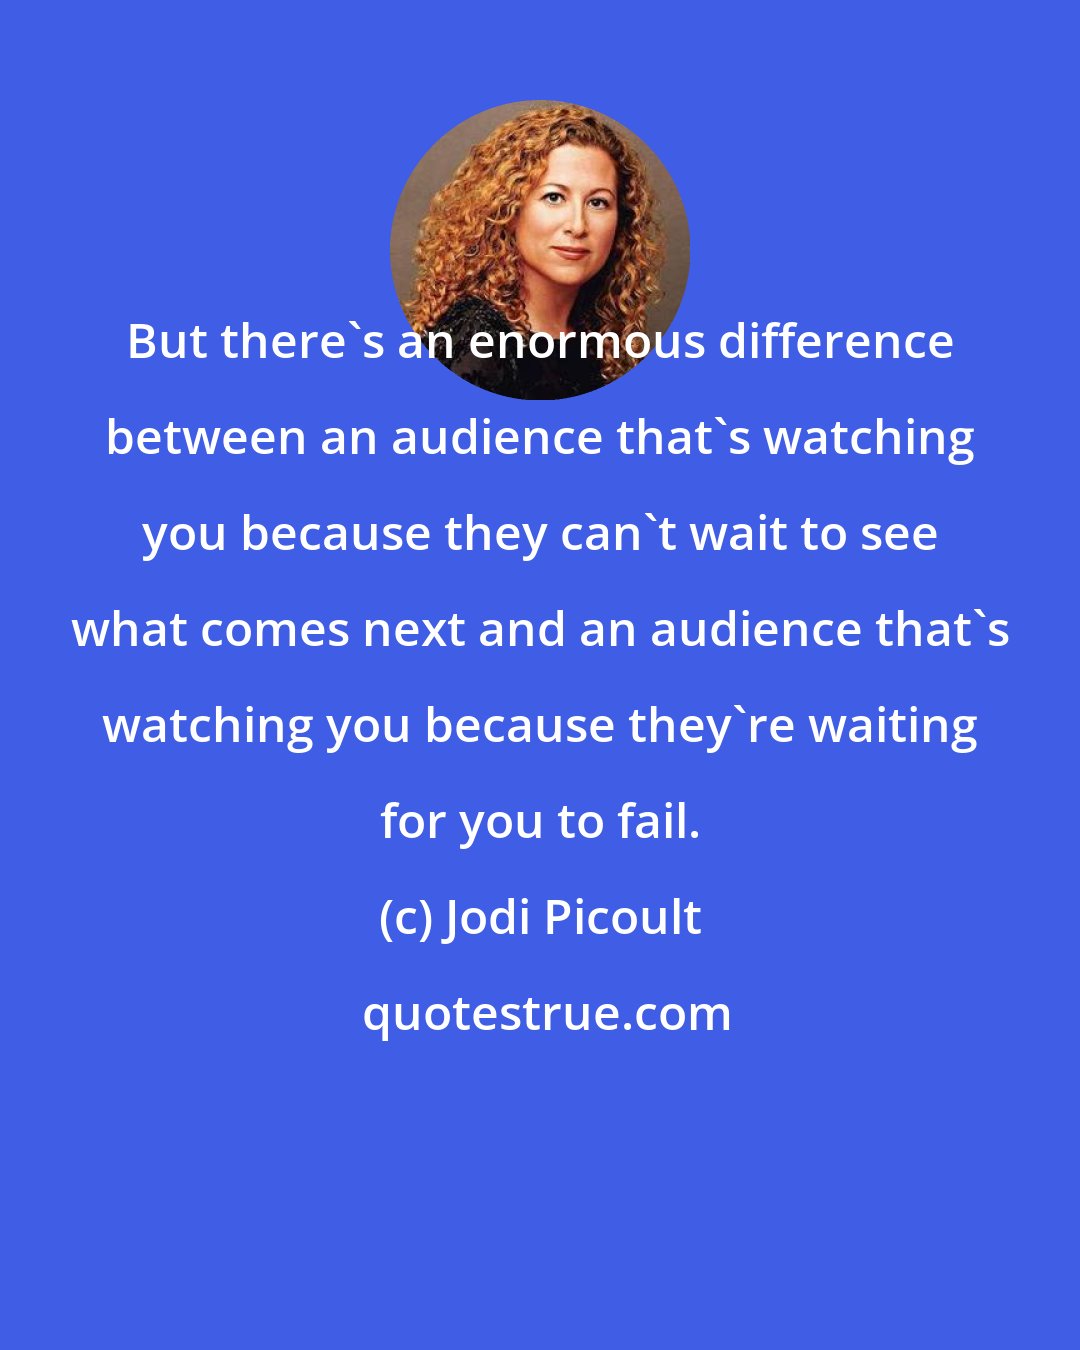 Jodi Picoult: But there's an enormous difference between an audience that's watching you because they can't wait to see what comes next and an audience that's watching you because they're waiting for you to fail.